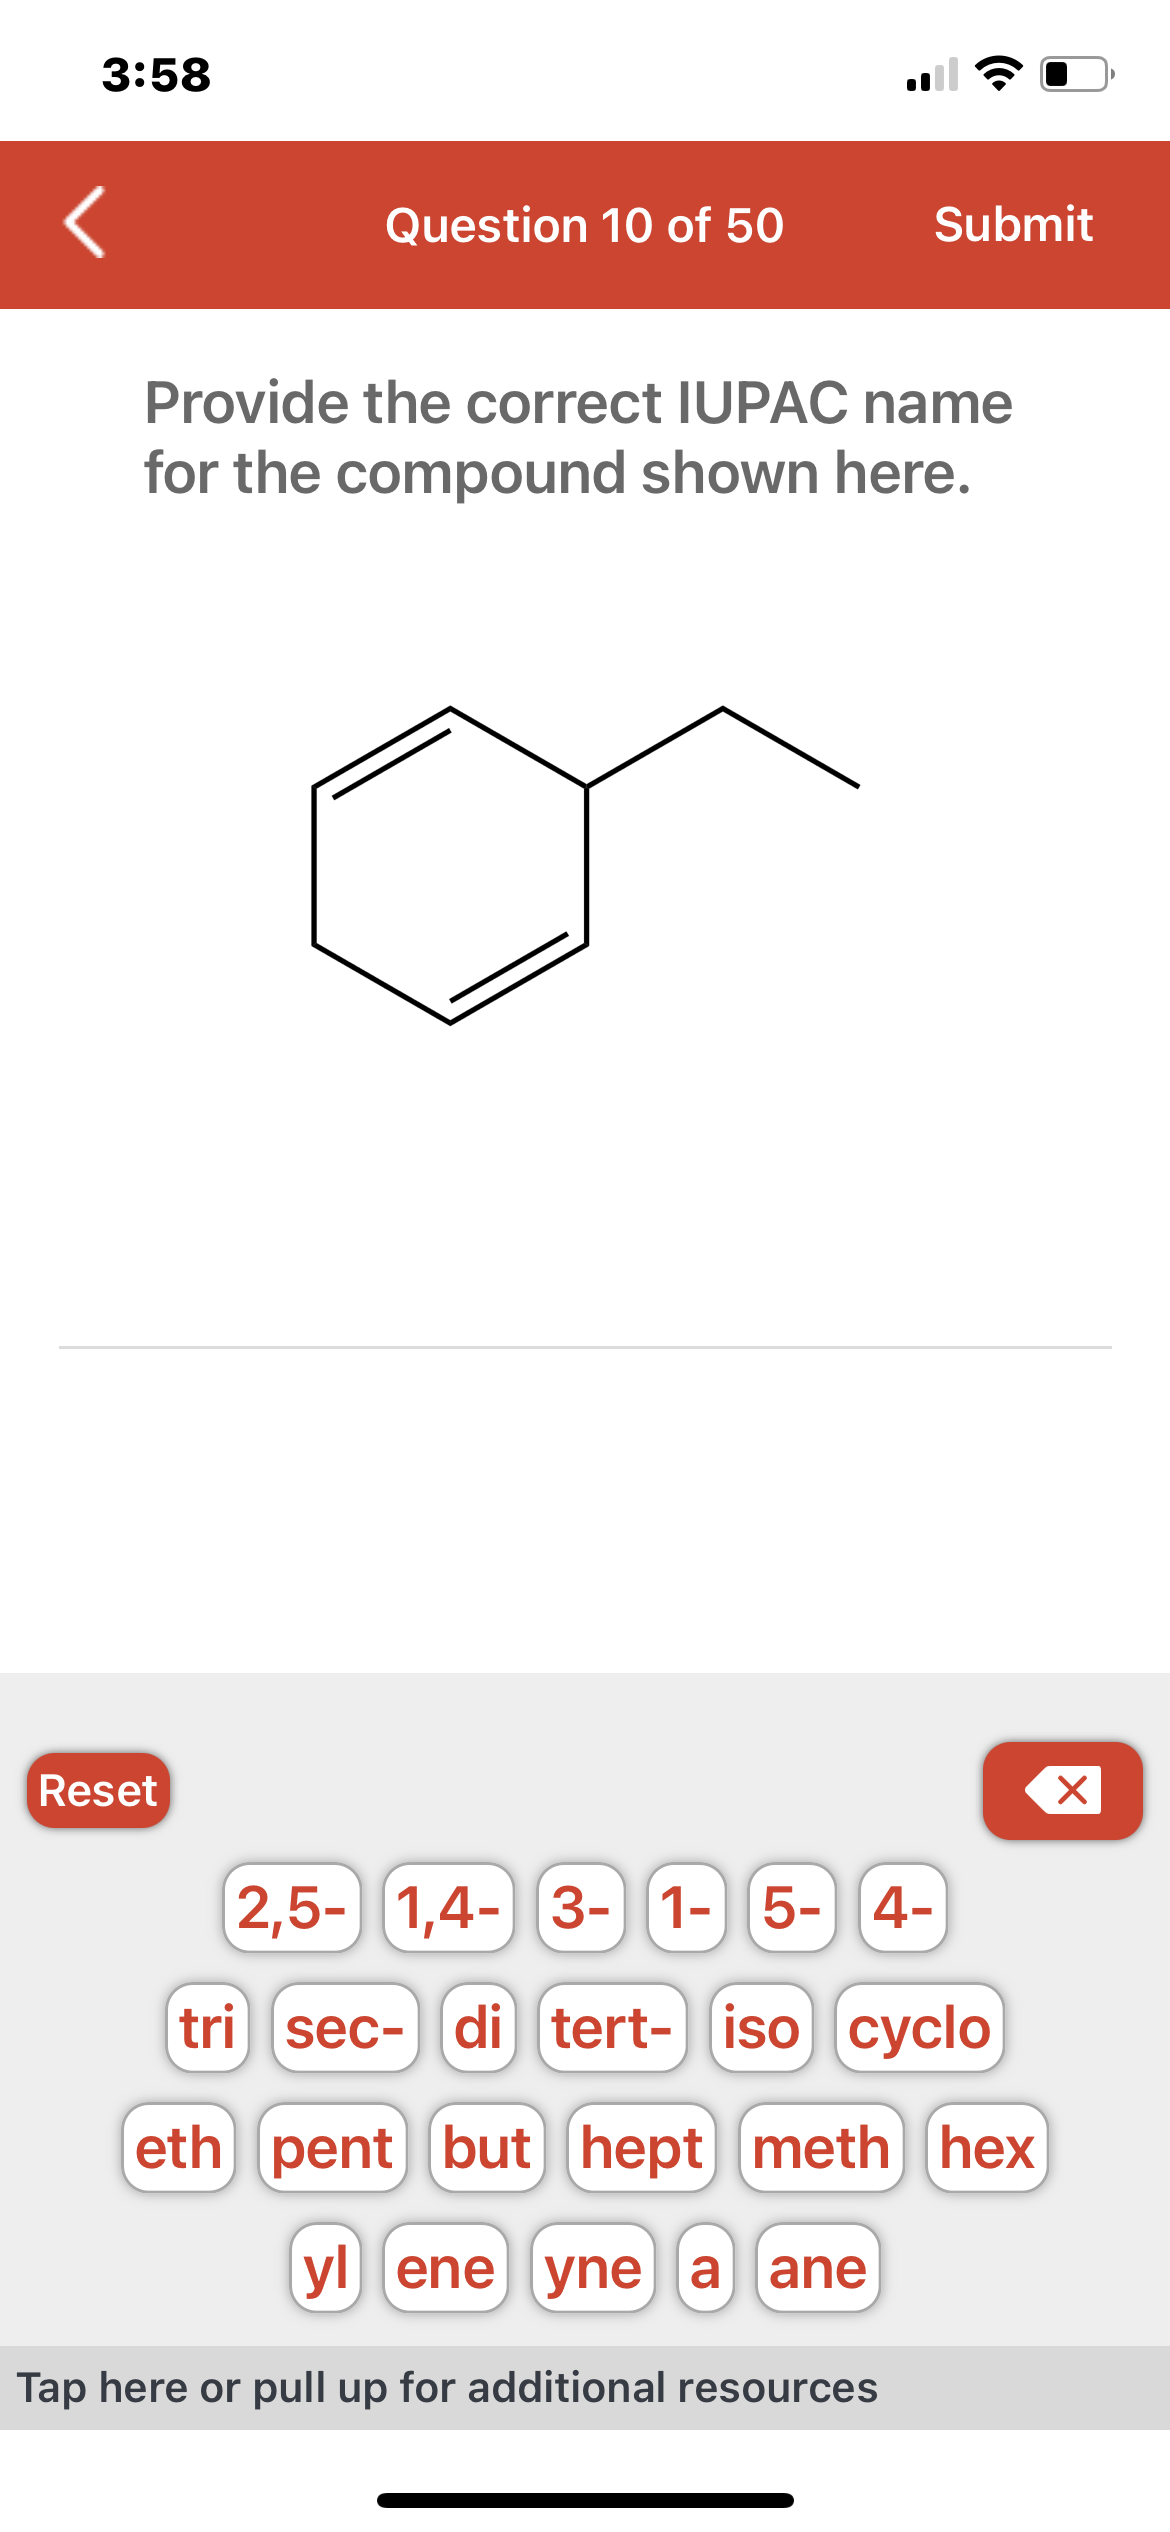 3:58
Question 10 of 50
Reset
Submit
Provide the correct IUPAC name
for the compound shown here.
2,5- 1,4- 3- 1- 5- 4-
tri sec- di tert- iso cyclo
eth pent but hept meth hex
yl ene yne a ane
Tap here or pull up for additional resources
X